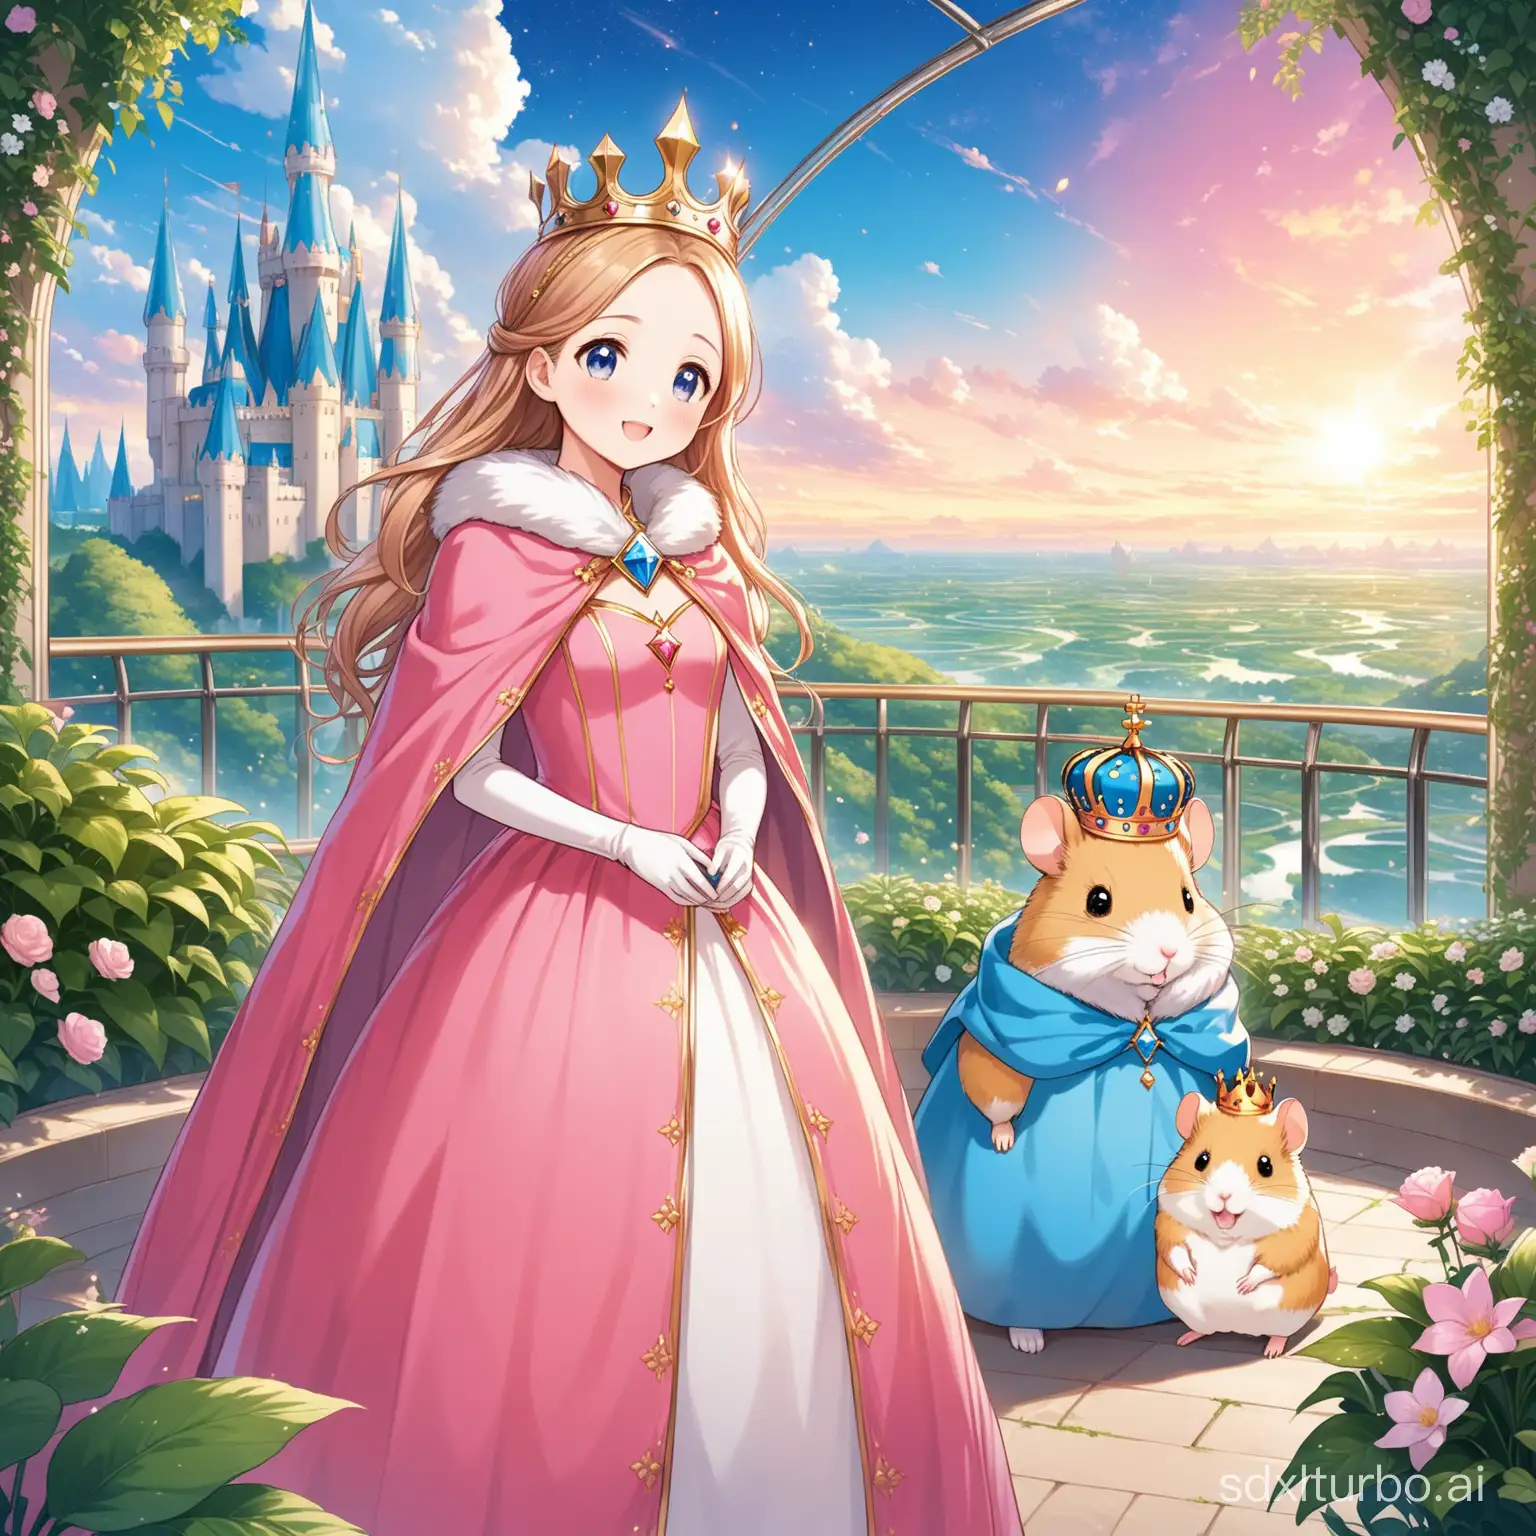 There is a princess wearing a pink dress and a blue crown and a hamster with a king's crown and a cloak enjoying the scenery in the sky garden